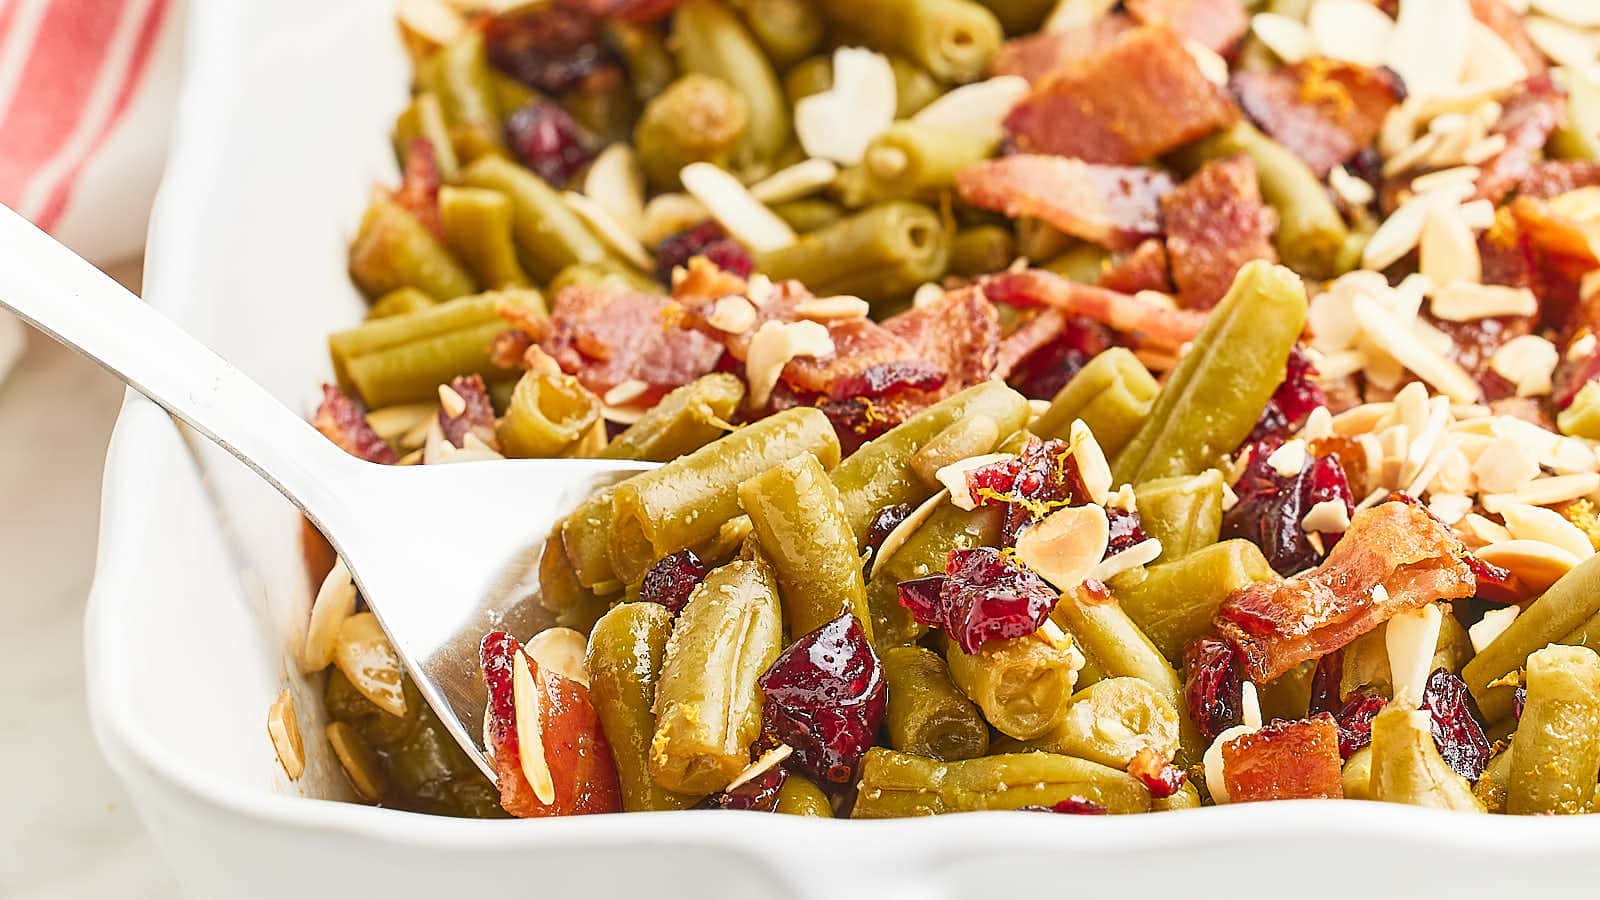 <p>Our Crack Green Beans recipe is a delicious twist on a traditional green bean casserole. And it's incredibly easy to make. We combine canned green beans, cranberries, and crispy bacon, toss it in a sweet and savory sauce, and finish it with sliced almonds.</p><p><strong>Get the Recipe: <a href="https://cheerfulcook.com/crack-green-beans/" rel="noreferrer noopener">Holiday Crack Green Beans</a></strong></p>